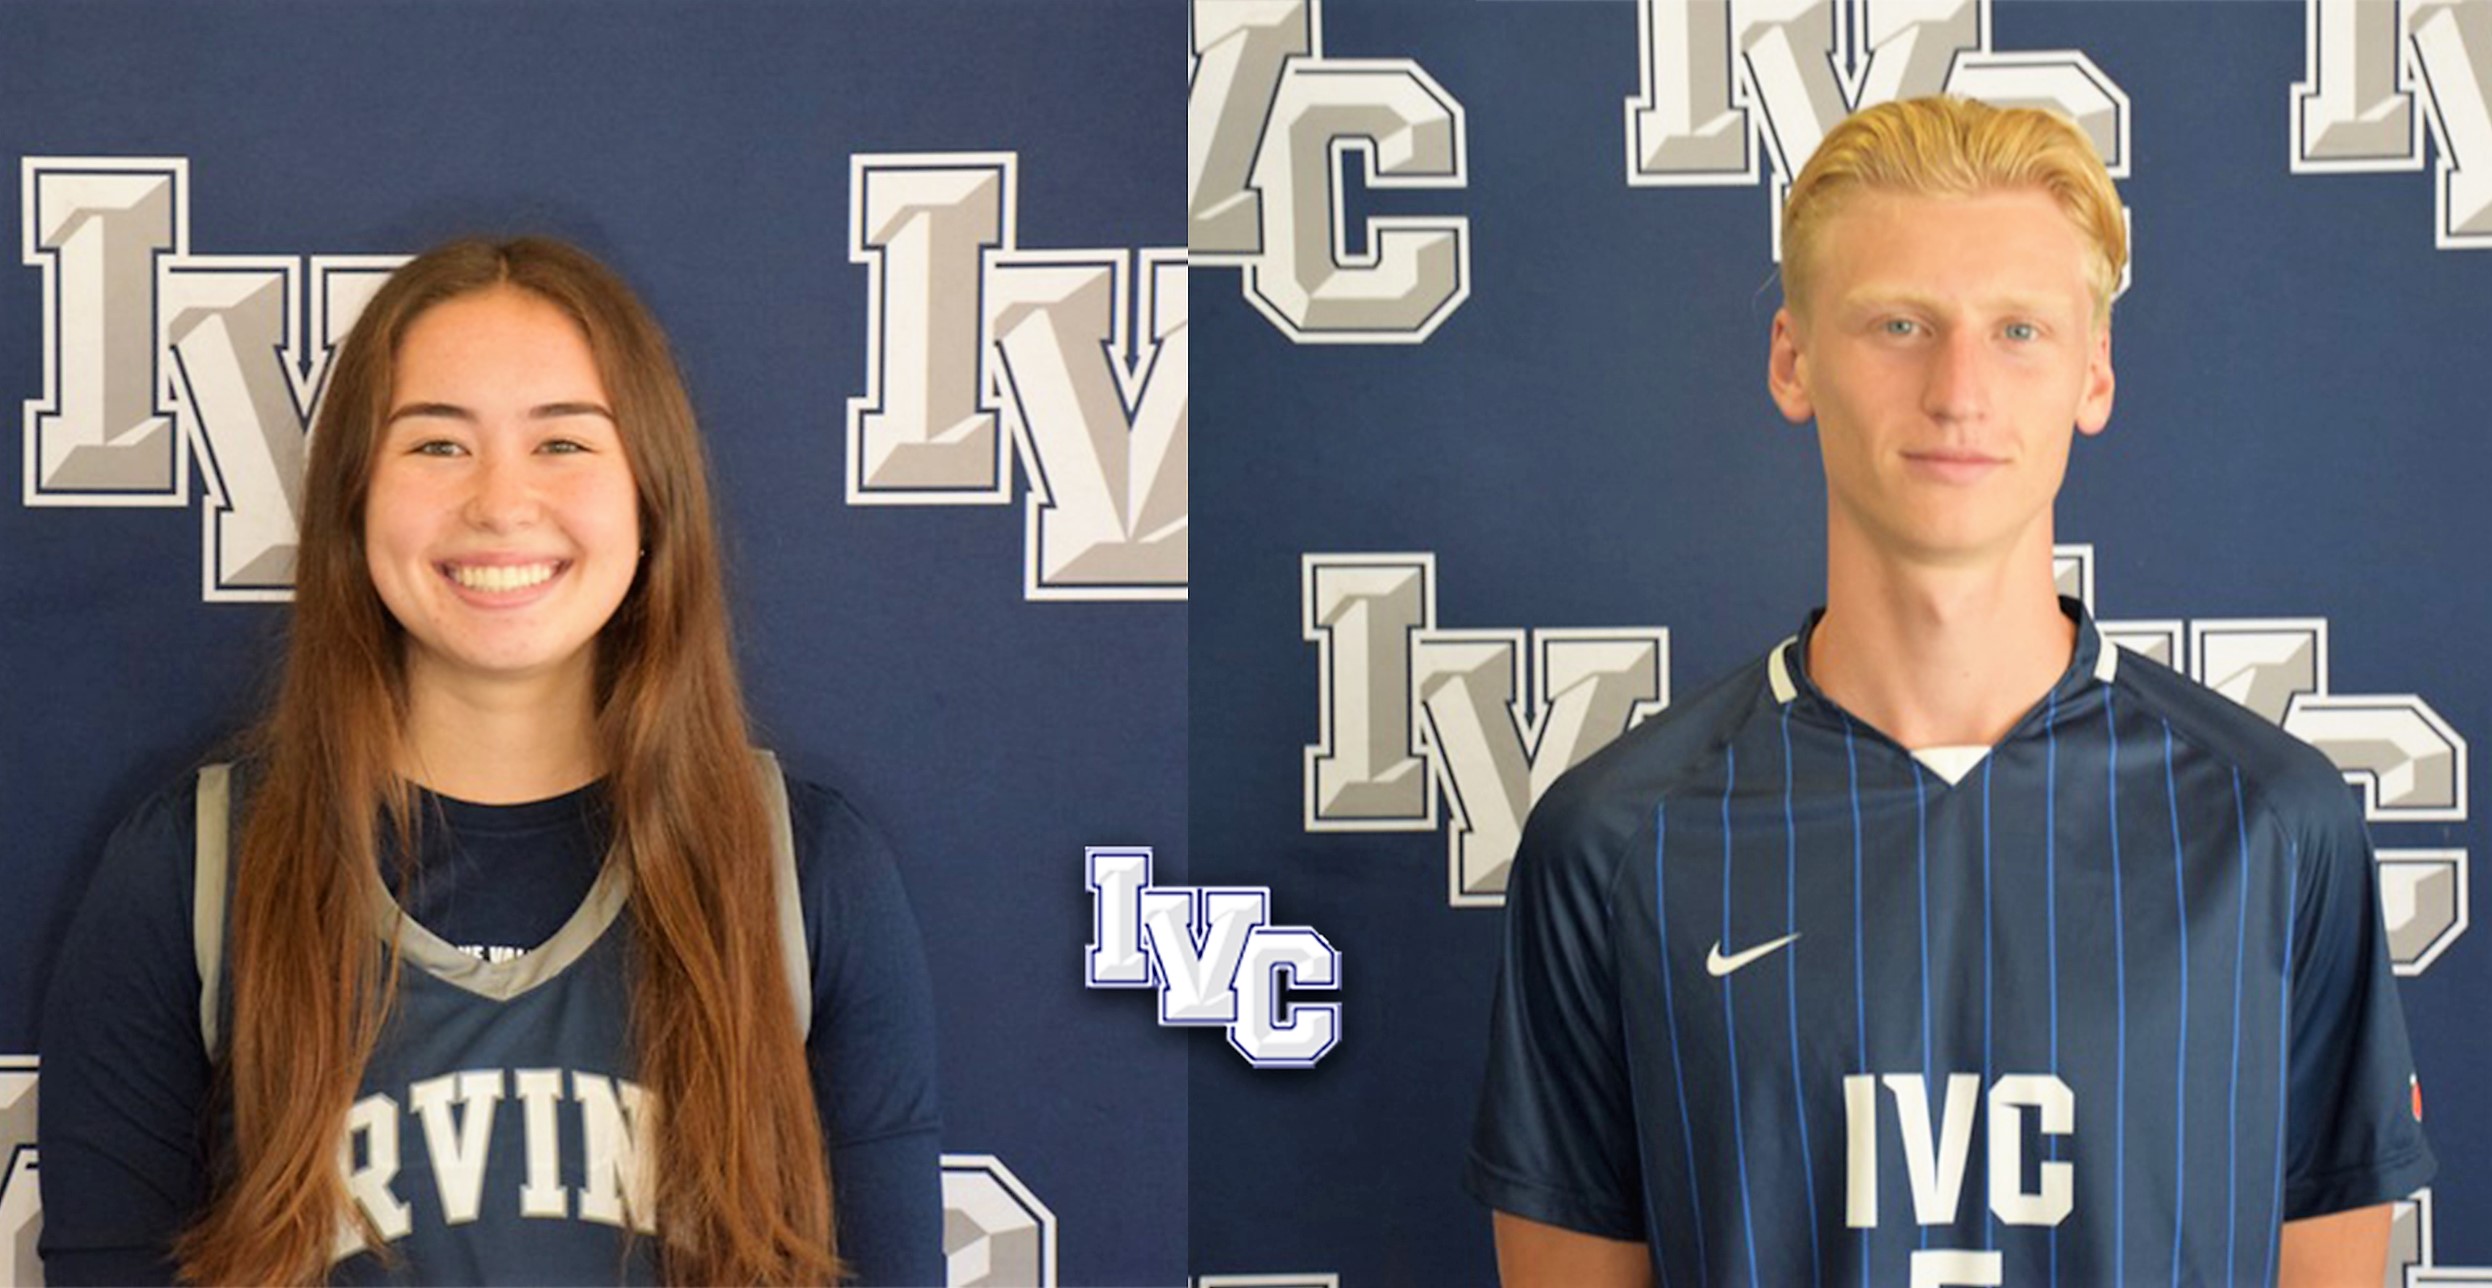 IVC's scholar athletes of the year are Freeman and Granzow